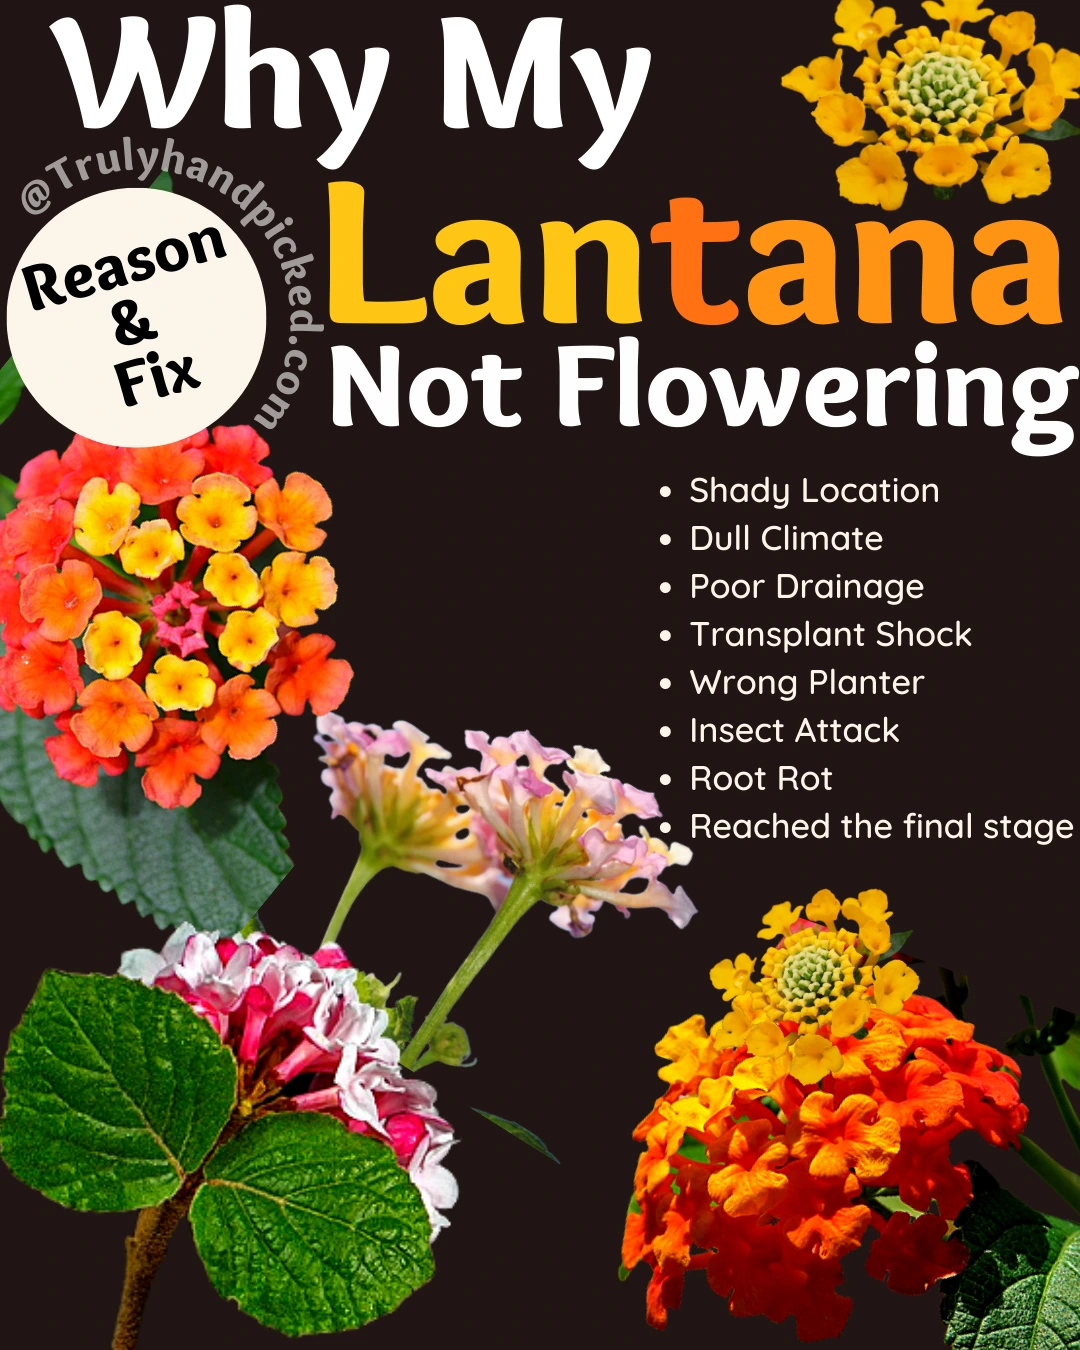 Why Lantana is not flowering reasons and fix for bloom